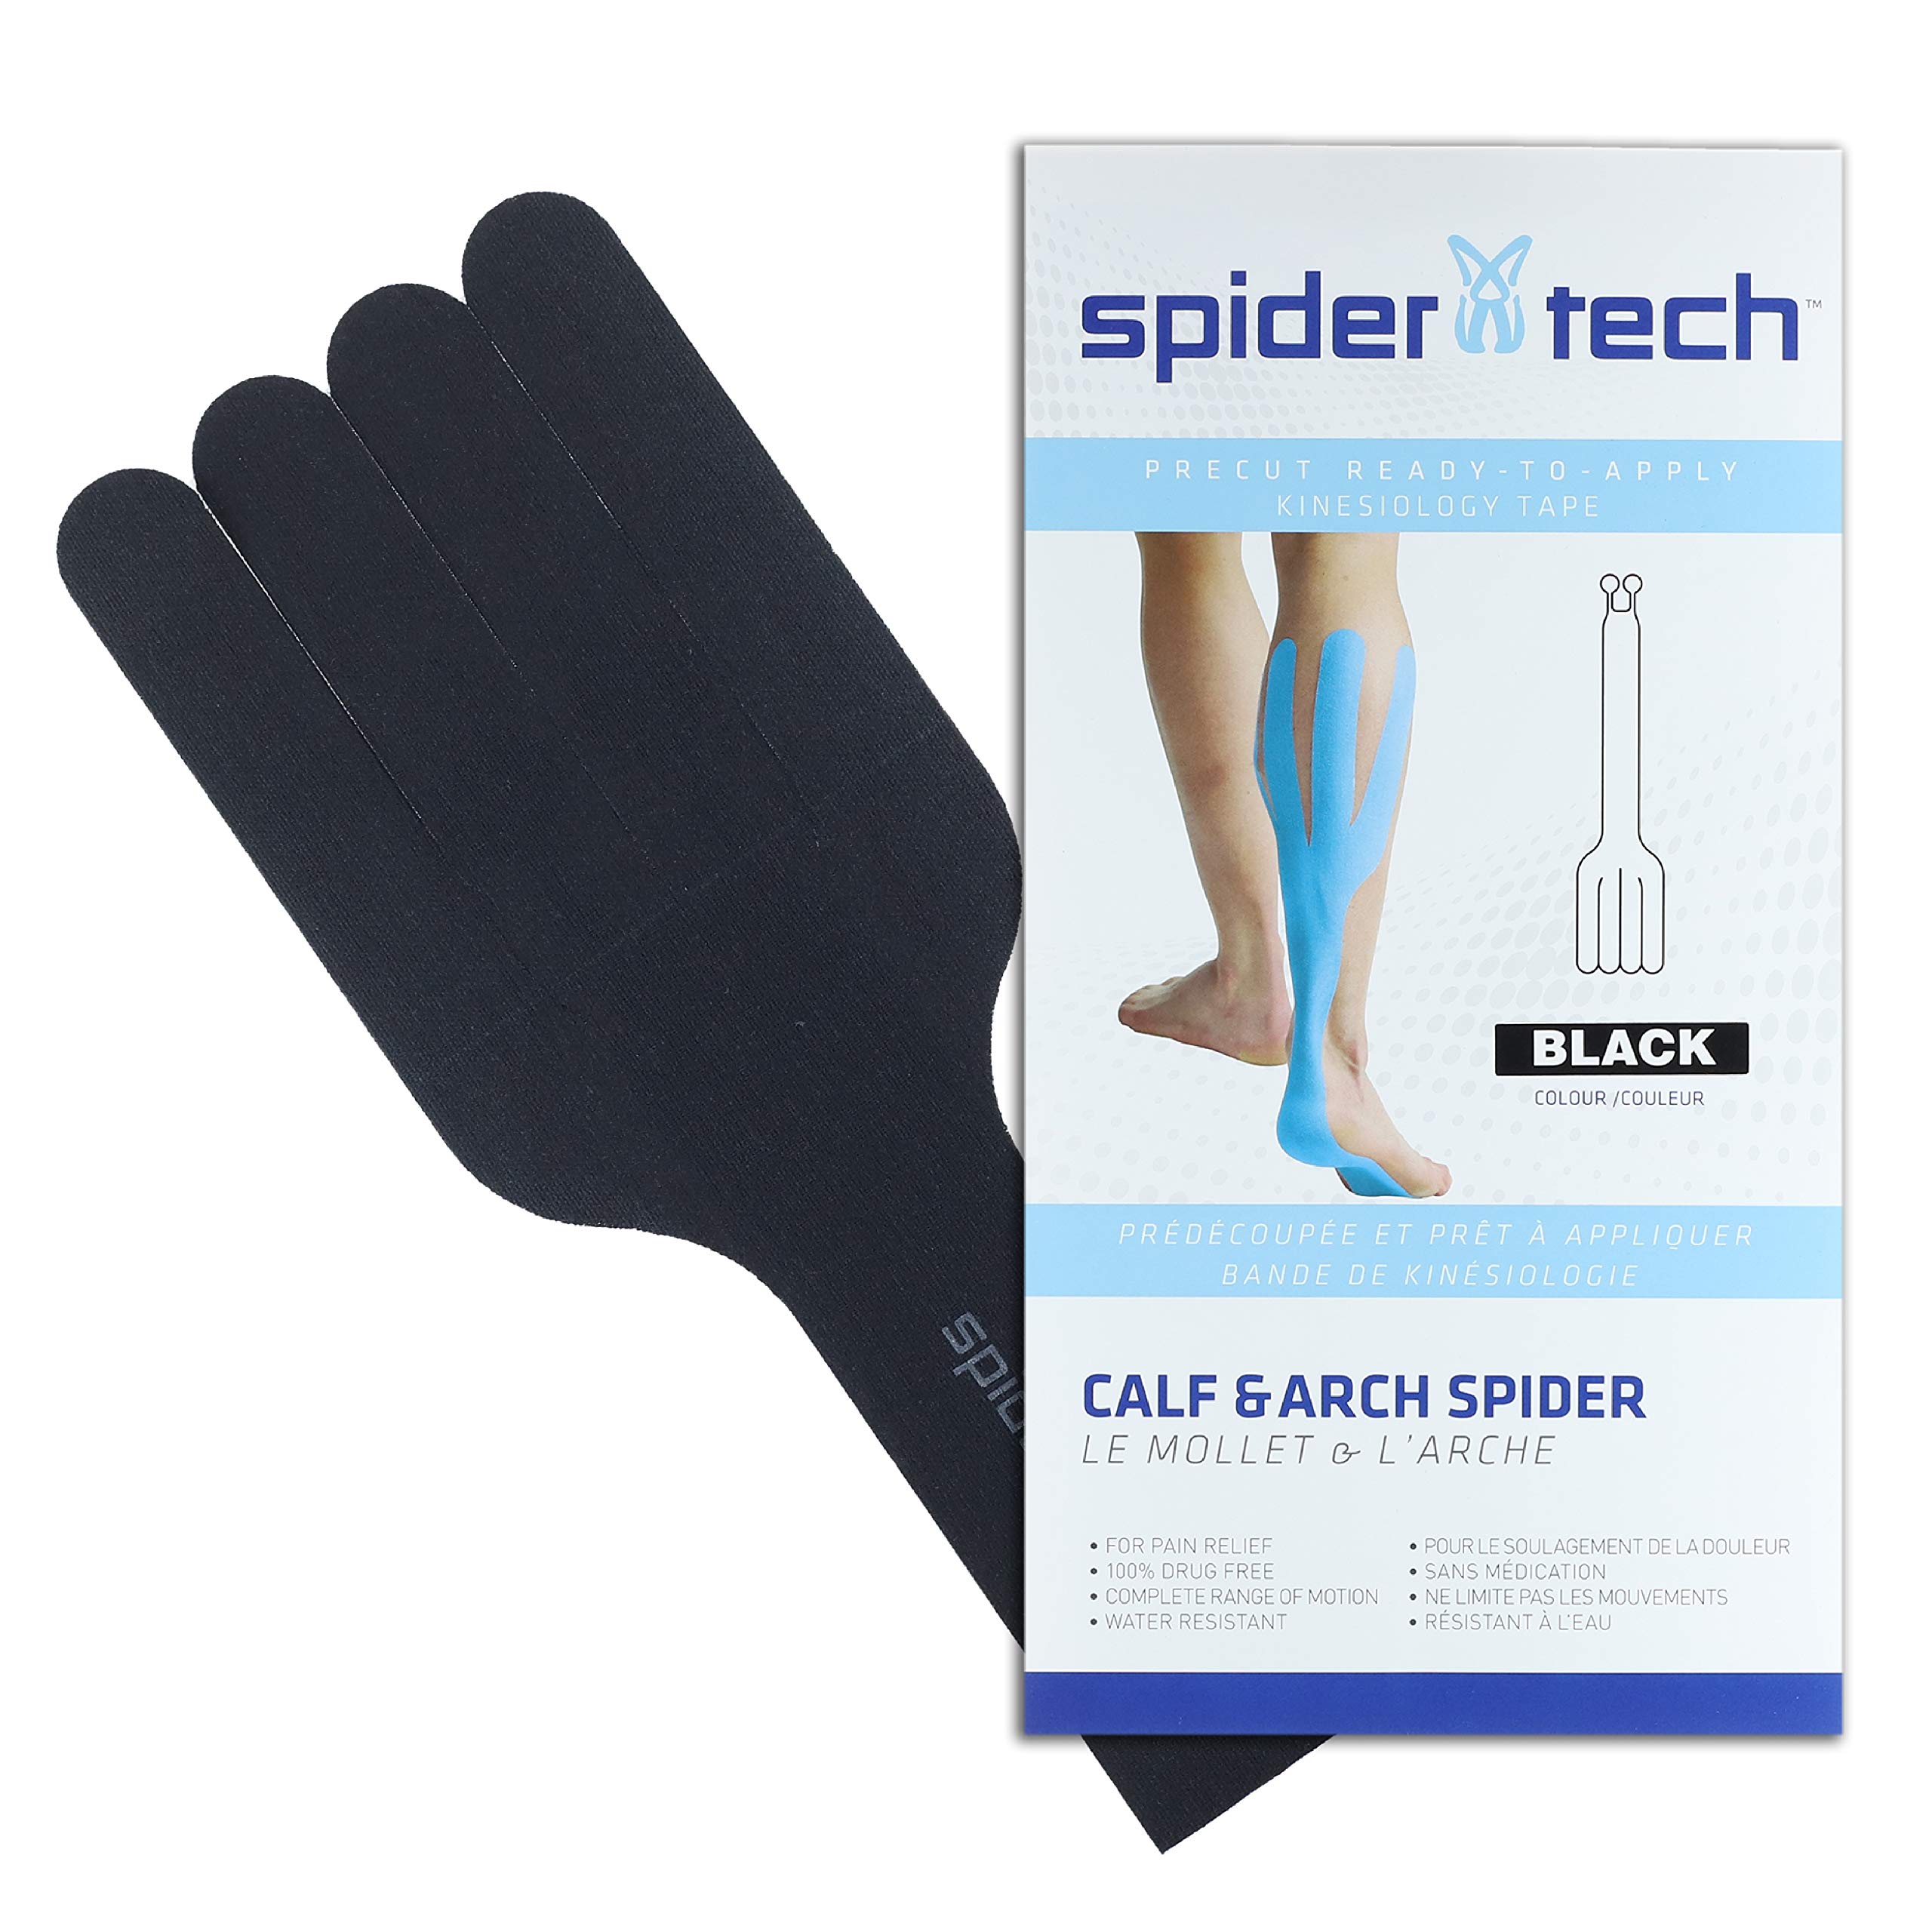 Spidertech Calf & Arch Pre-Cut Kinesiology Tape. Water-Resistant,  Latex-Free and Easy to use. Preferred by Athletes. Reduce Inflammation,  Help re-Train Muscles, Enhanced Performance (1 Pack) Black Calf & Arch